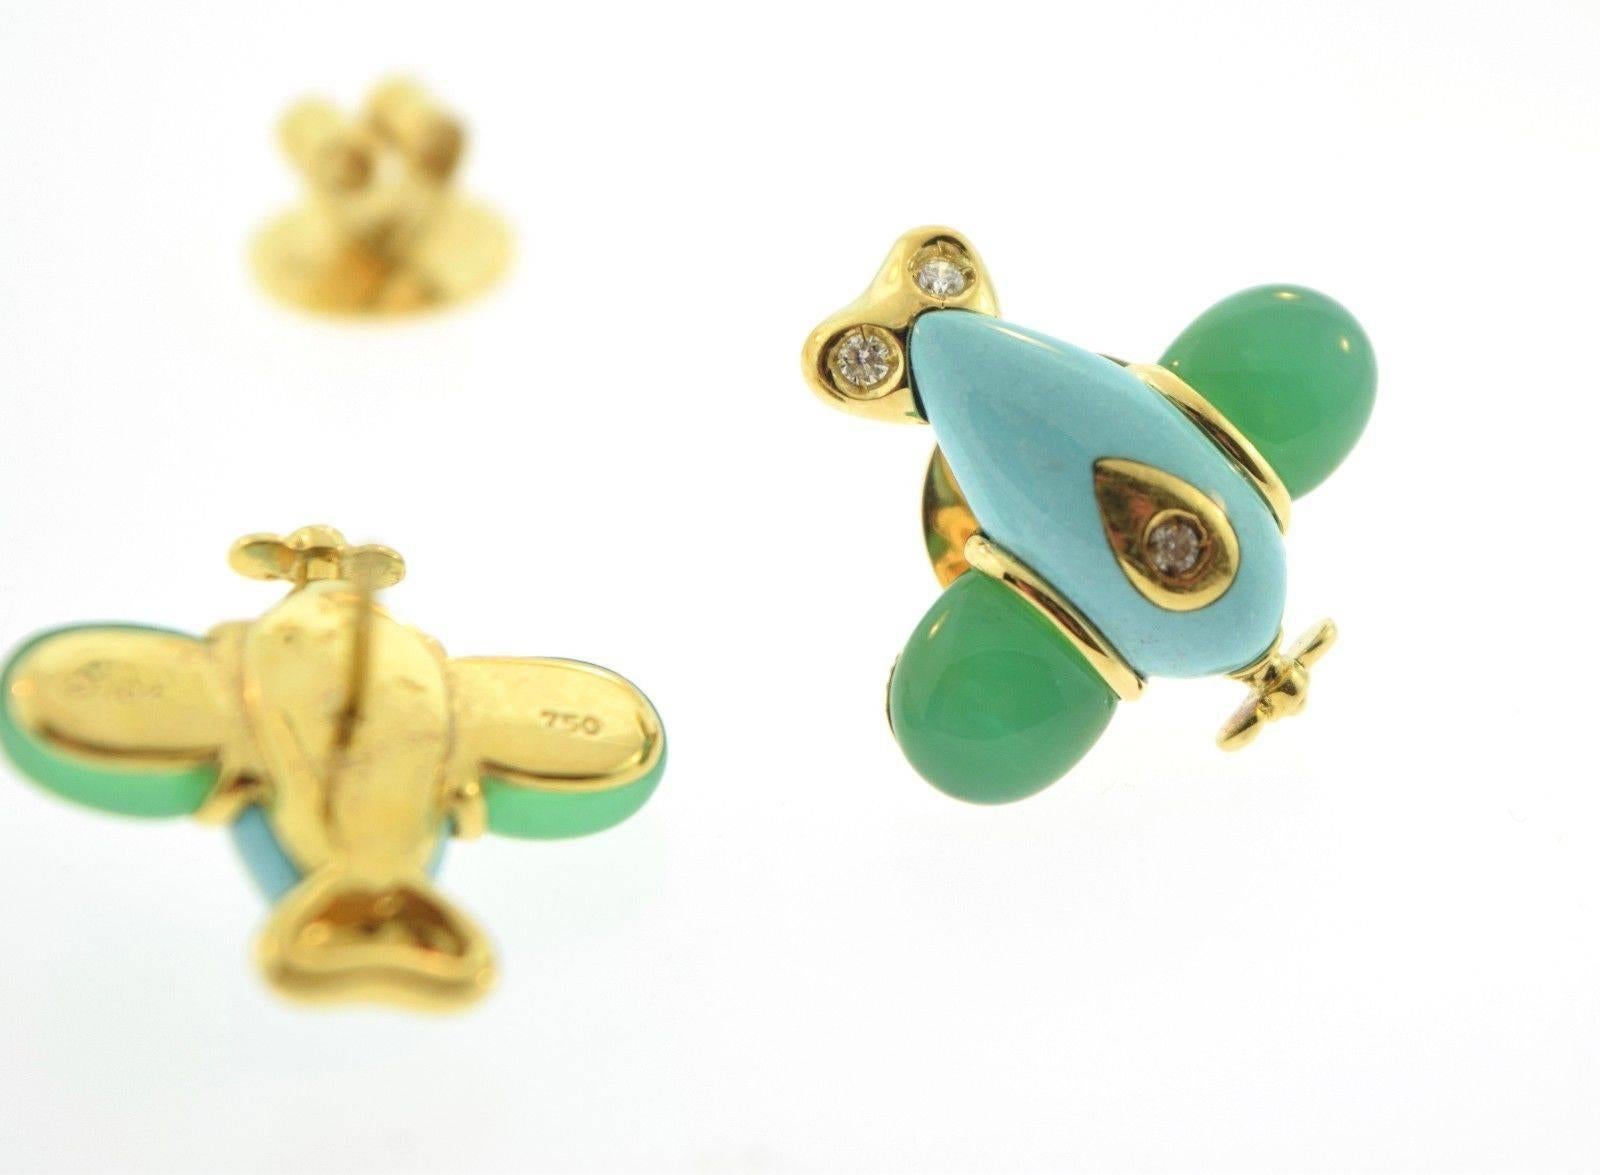 Turquoise and Chrysoprase Airplane Earrings with Diamonds, 18 Karat Yellow Gold For Sale 1